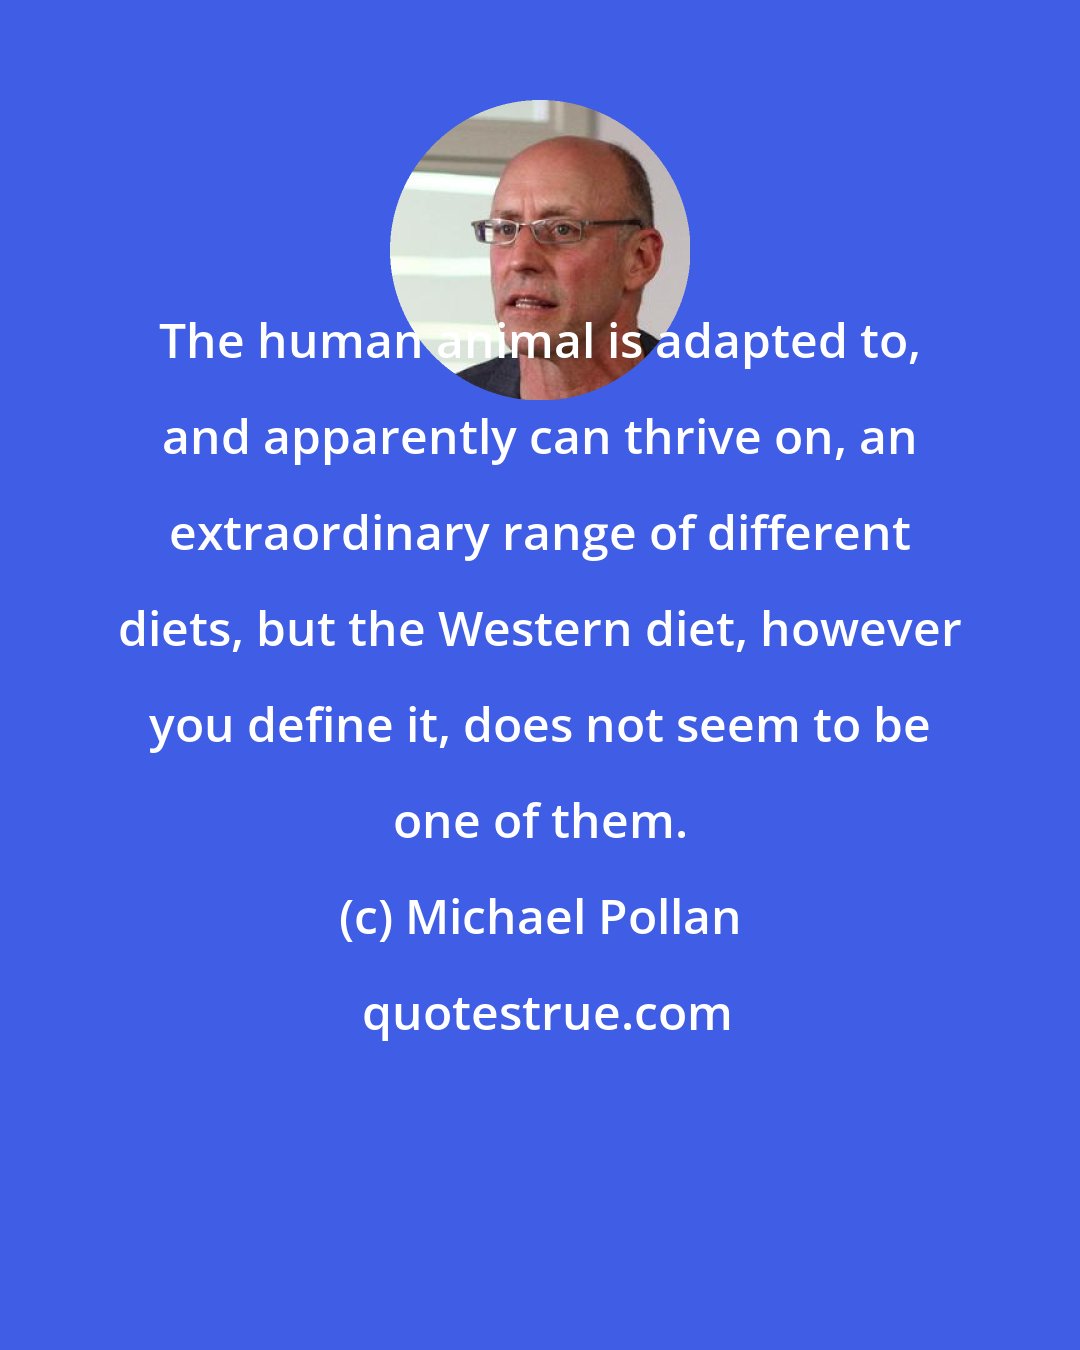 Michael Pollan: The human animal is adapted to, and apparently can thrive on, an extraordinary range of different diets, but the Western diet, however you define it, does not seem to be one of them.